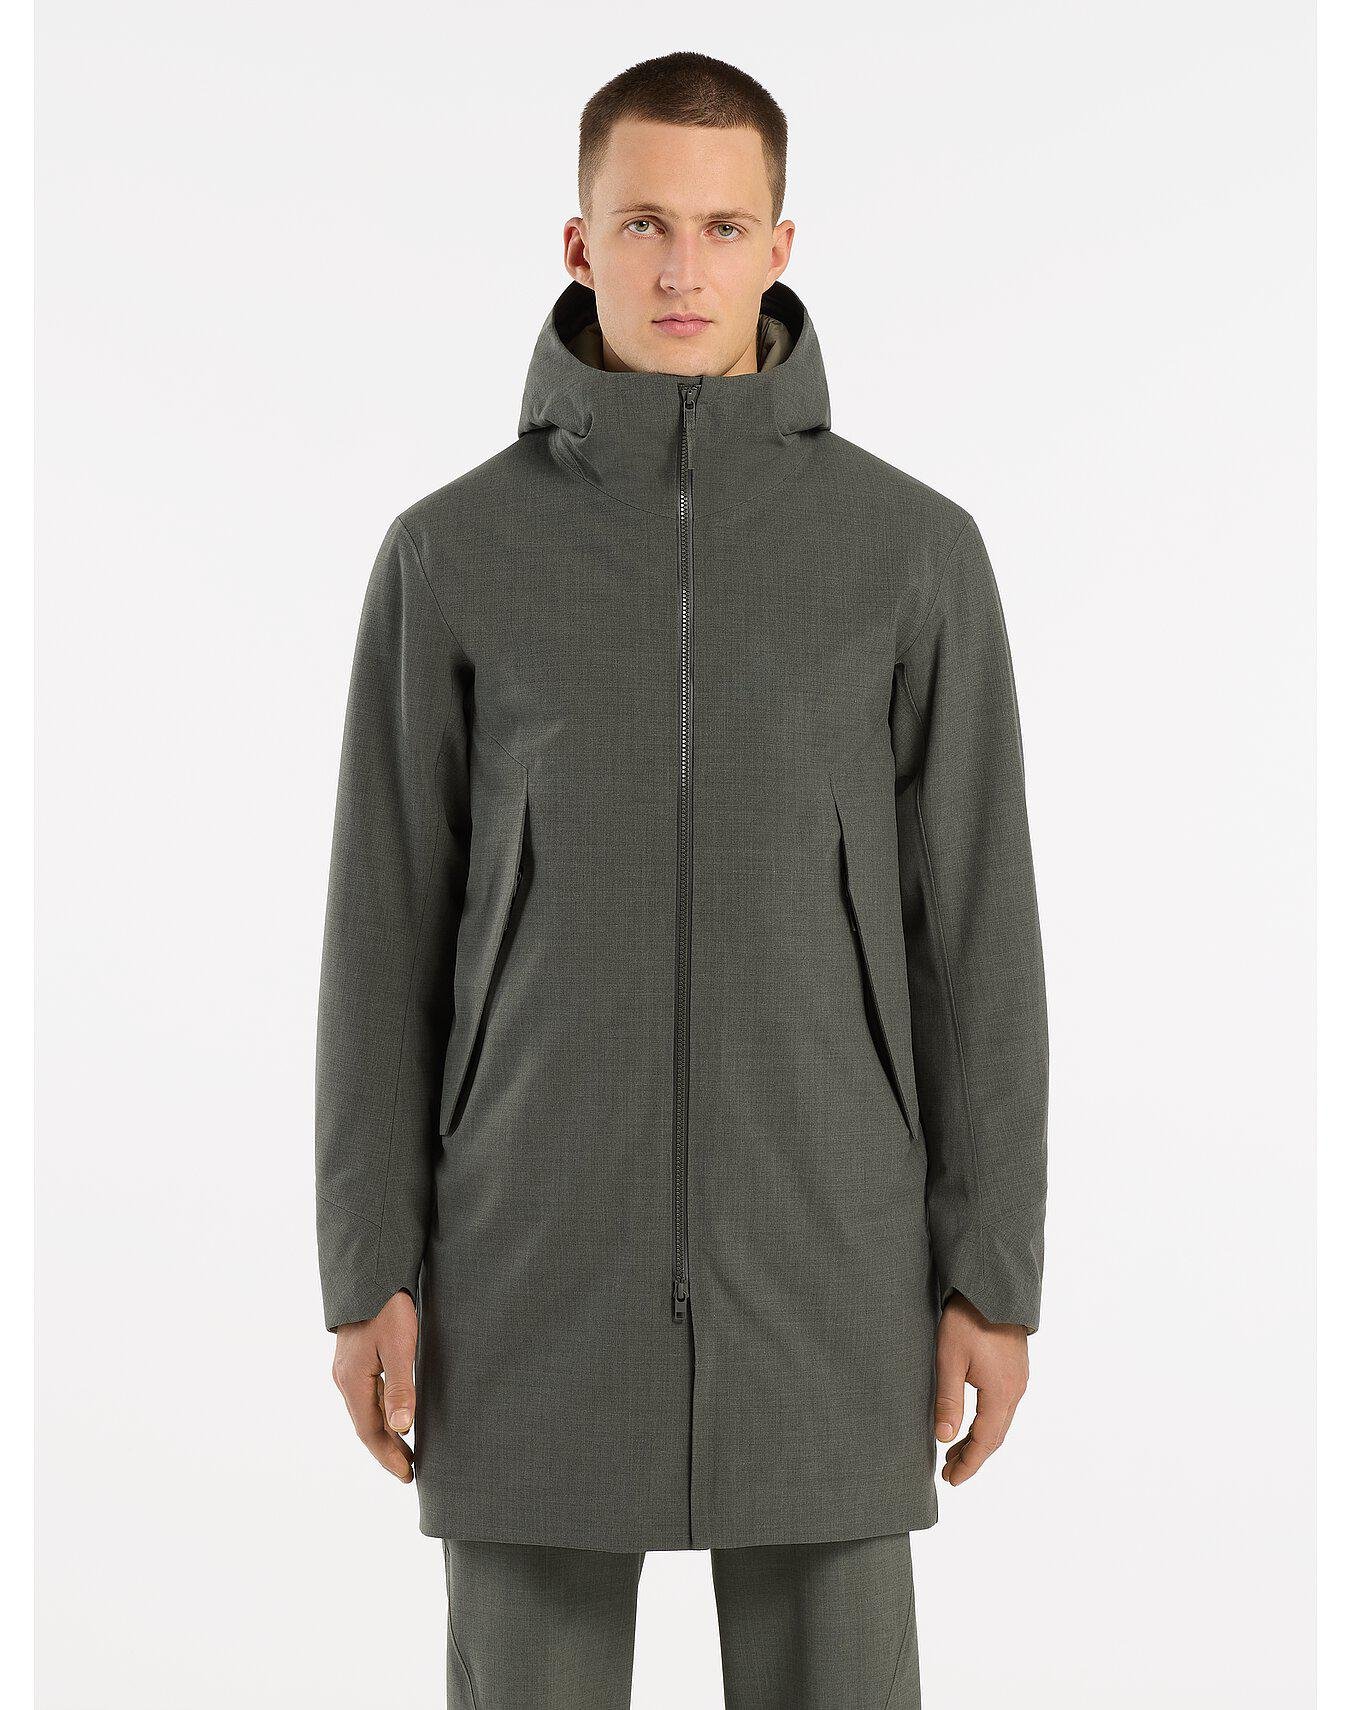 Monitor Insulated Tech Wool Coat Men's by VEILANCE | jellibeans